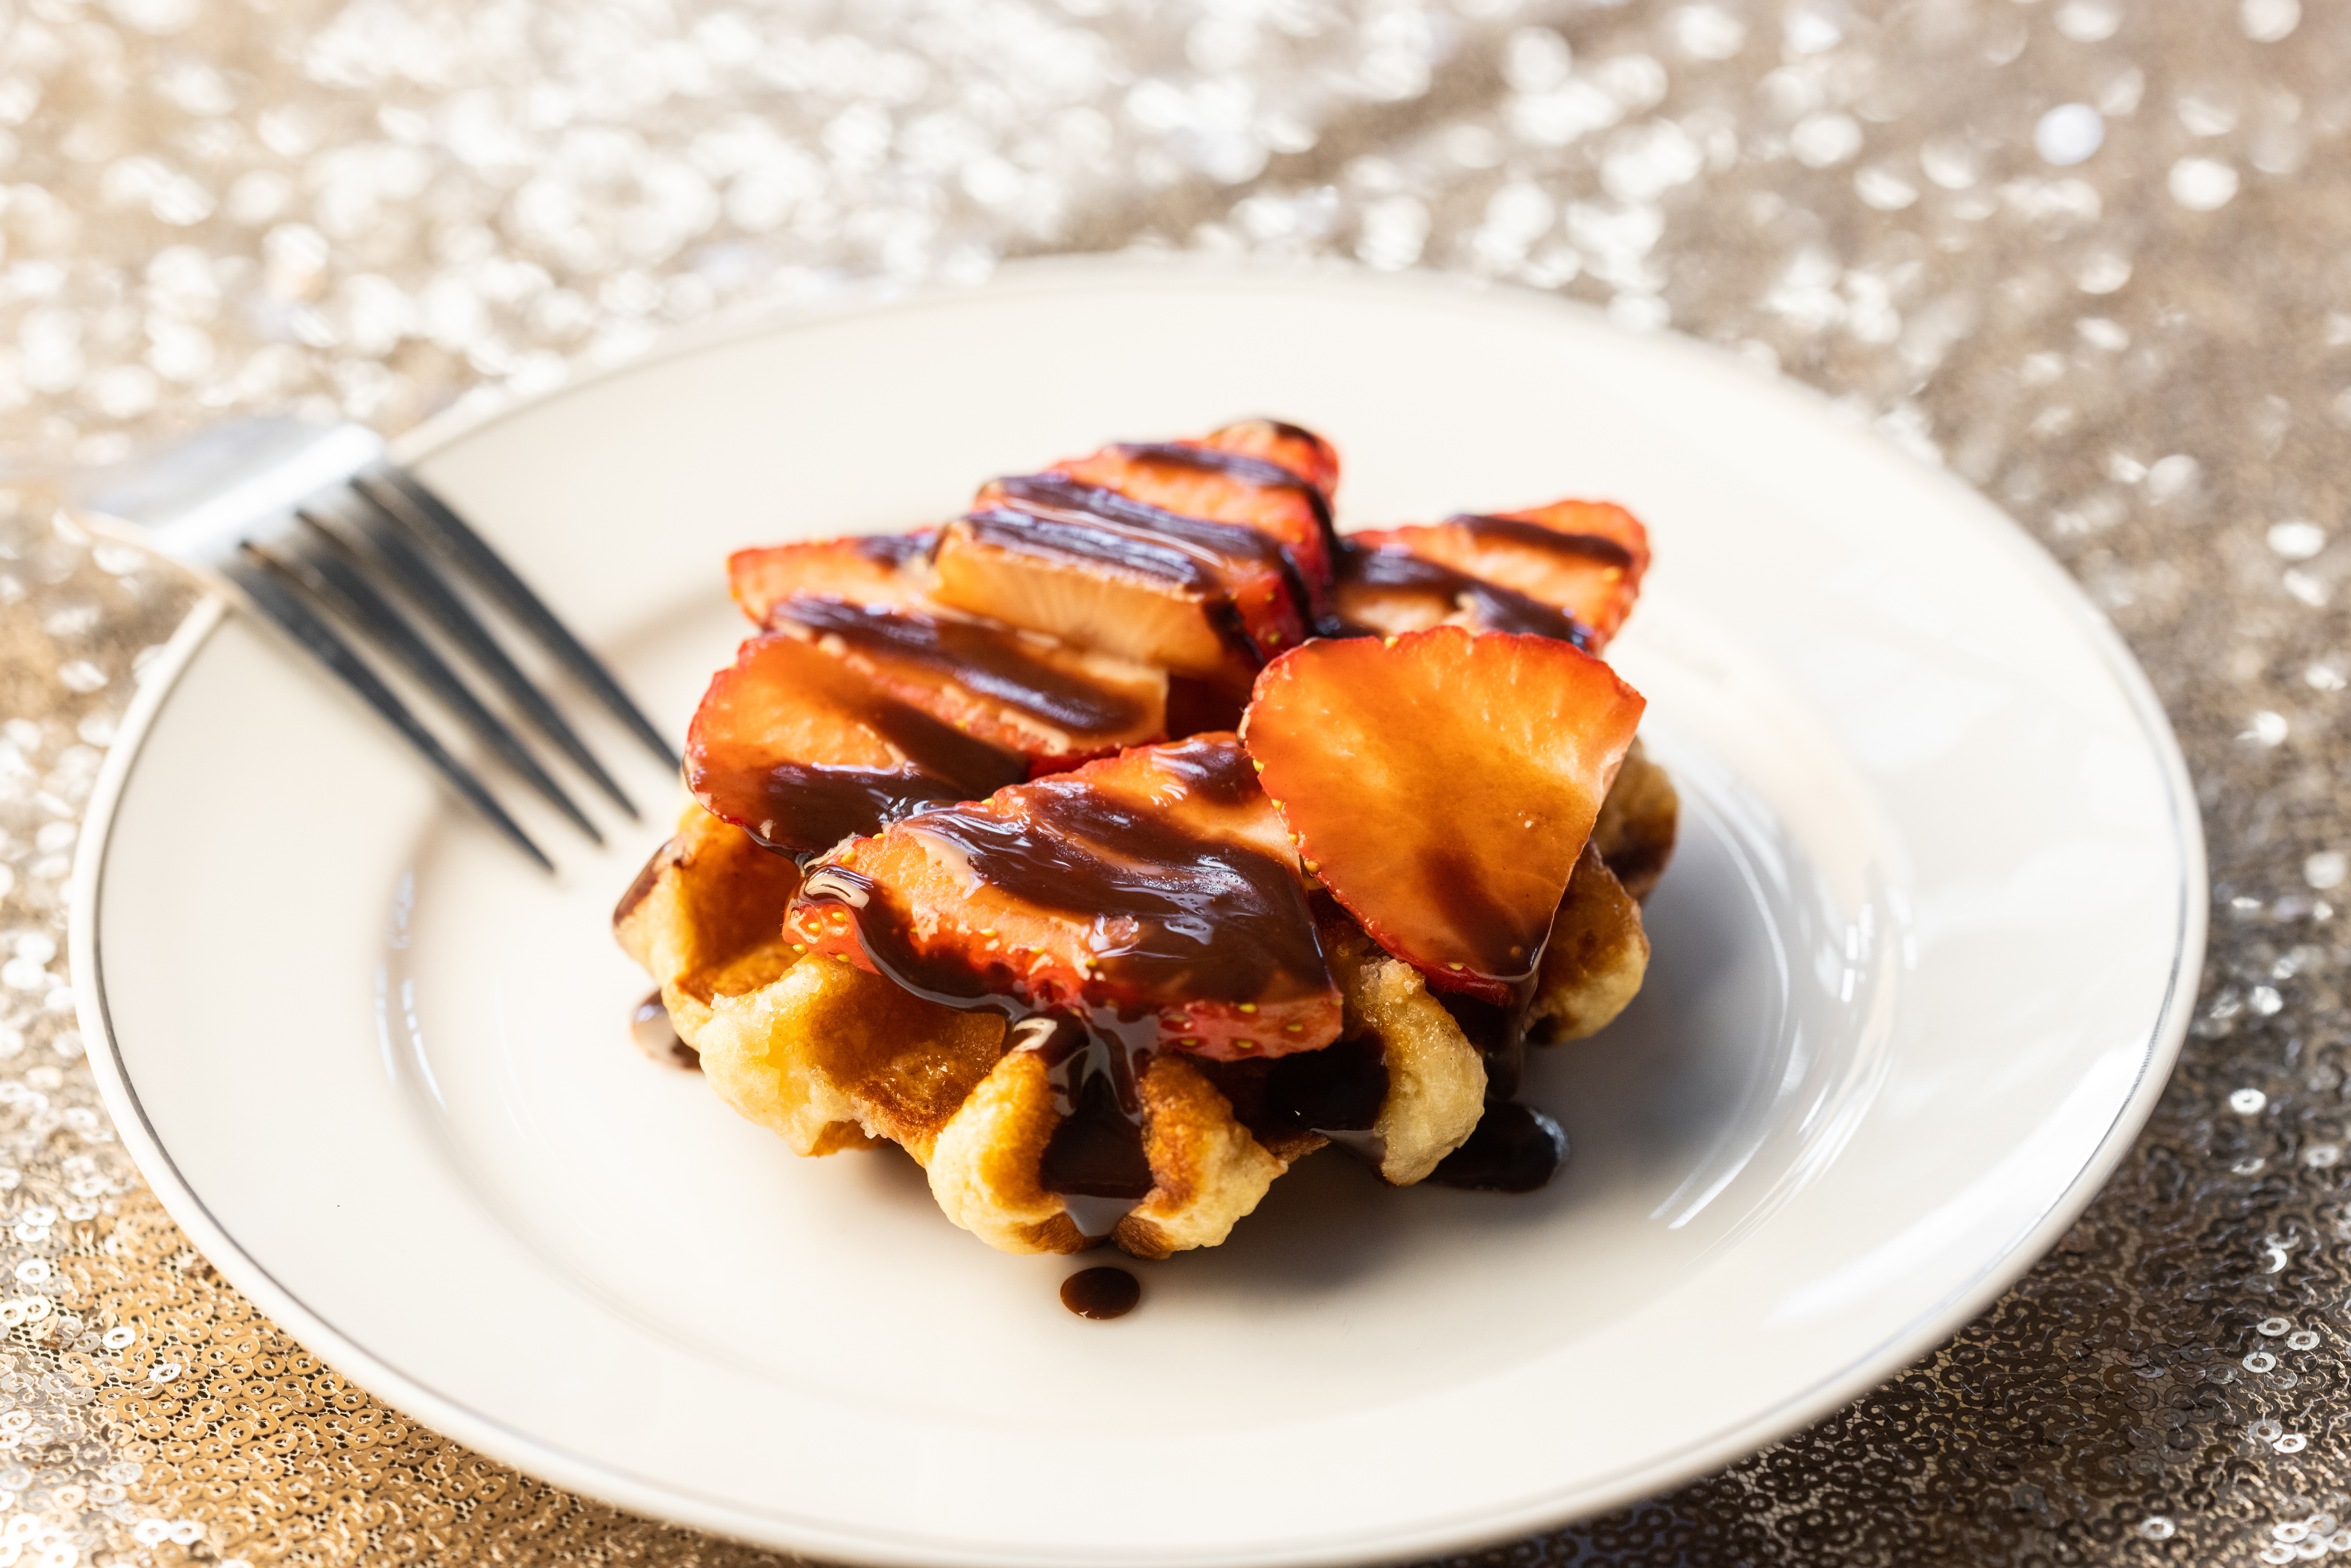 The Liege waffle, a traditional Belgian waffle, is made with pearl sugar and served with a choice of toppings, such as strawberries and Dutch chocolate sauce.